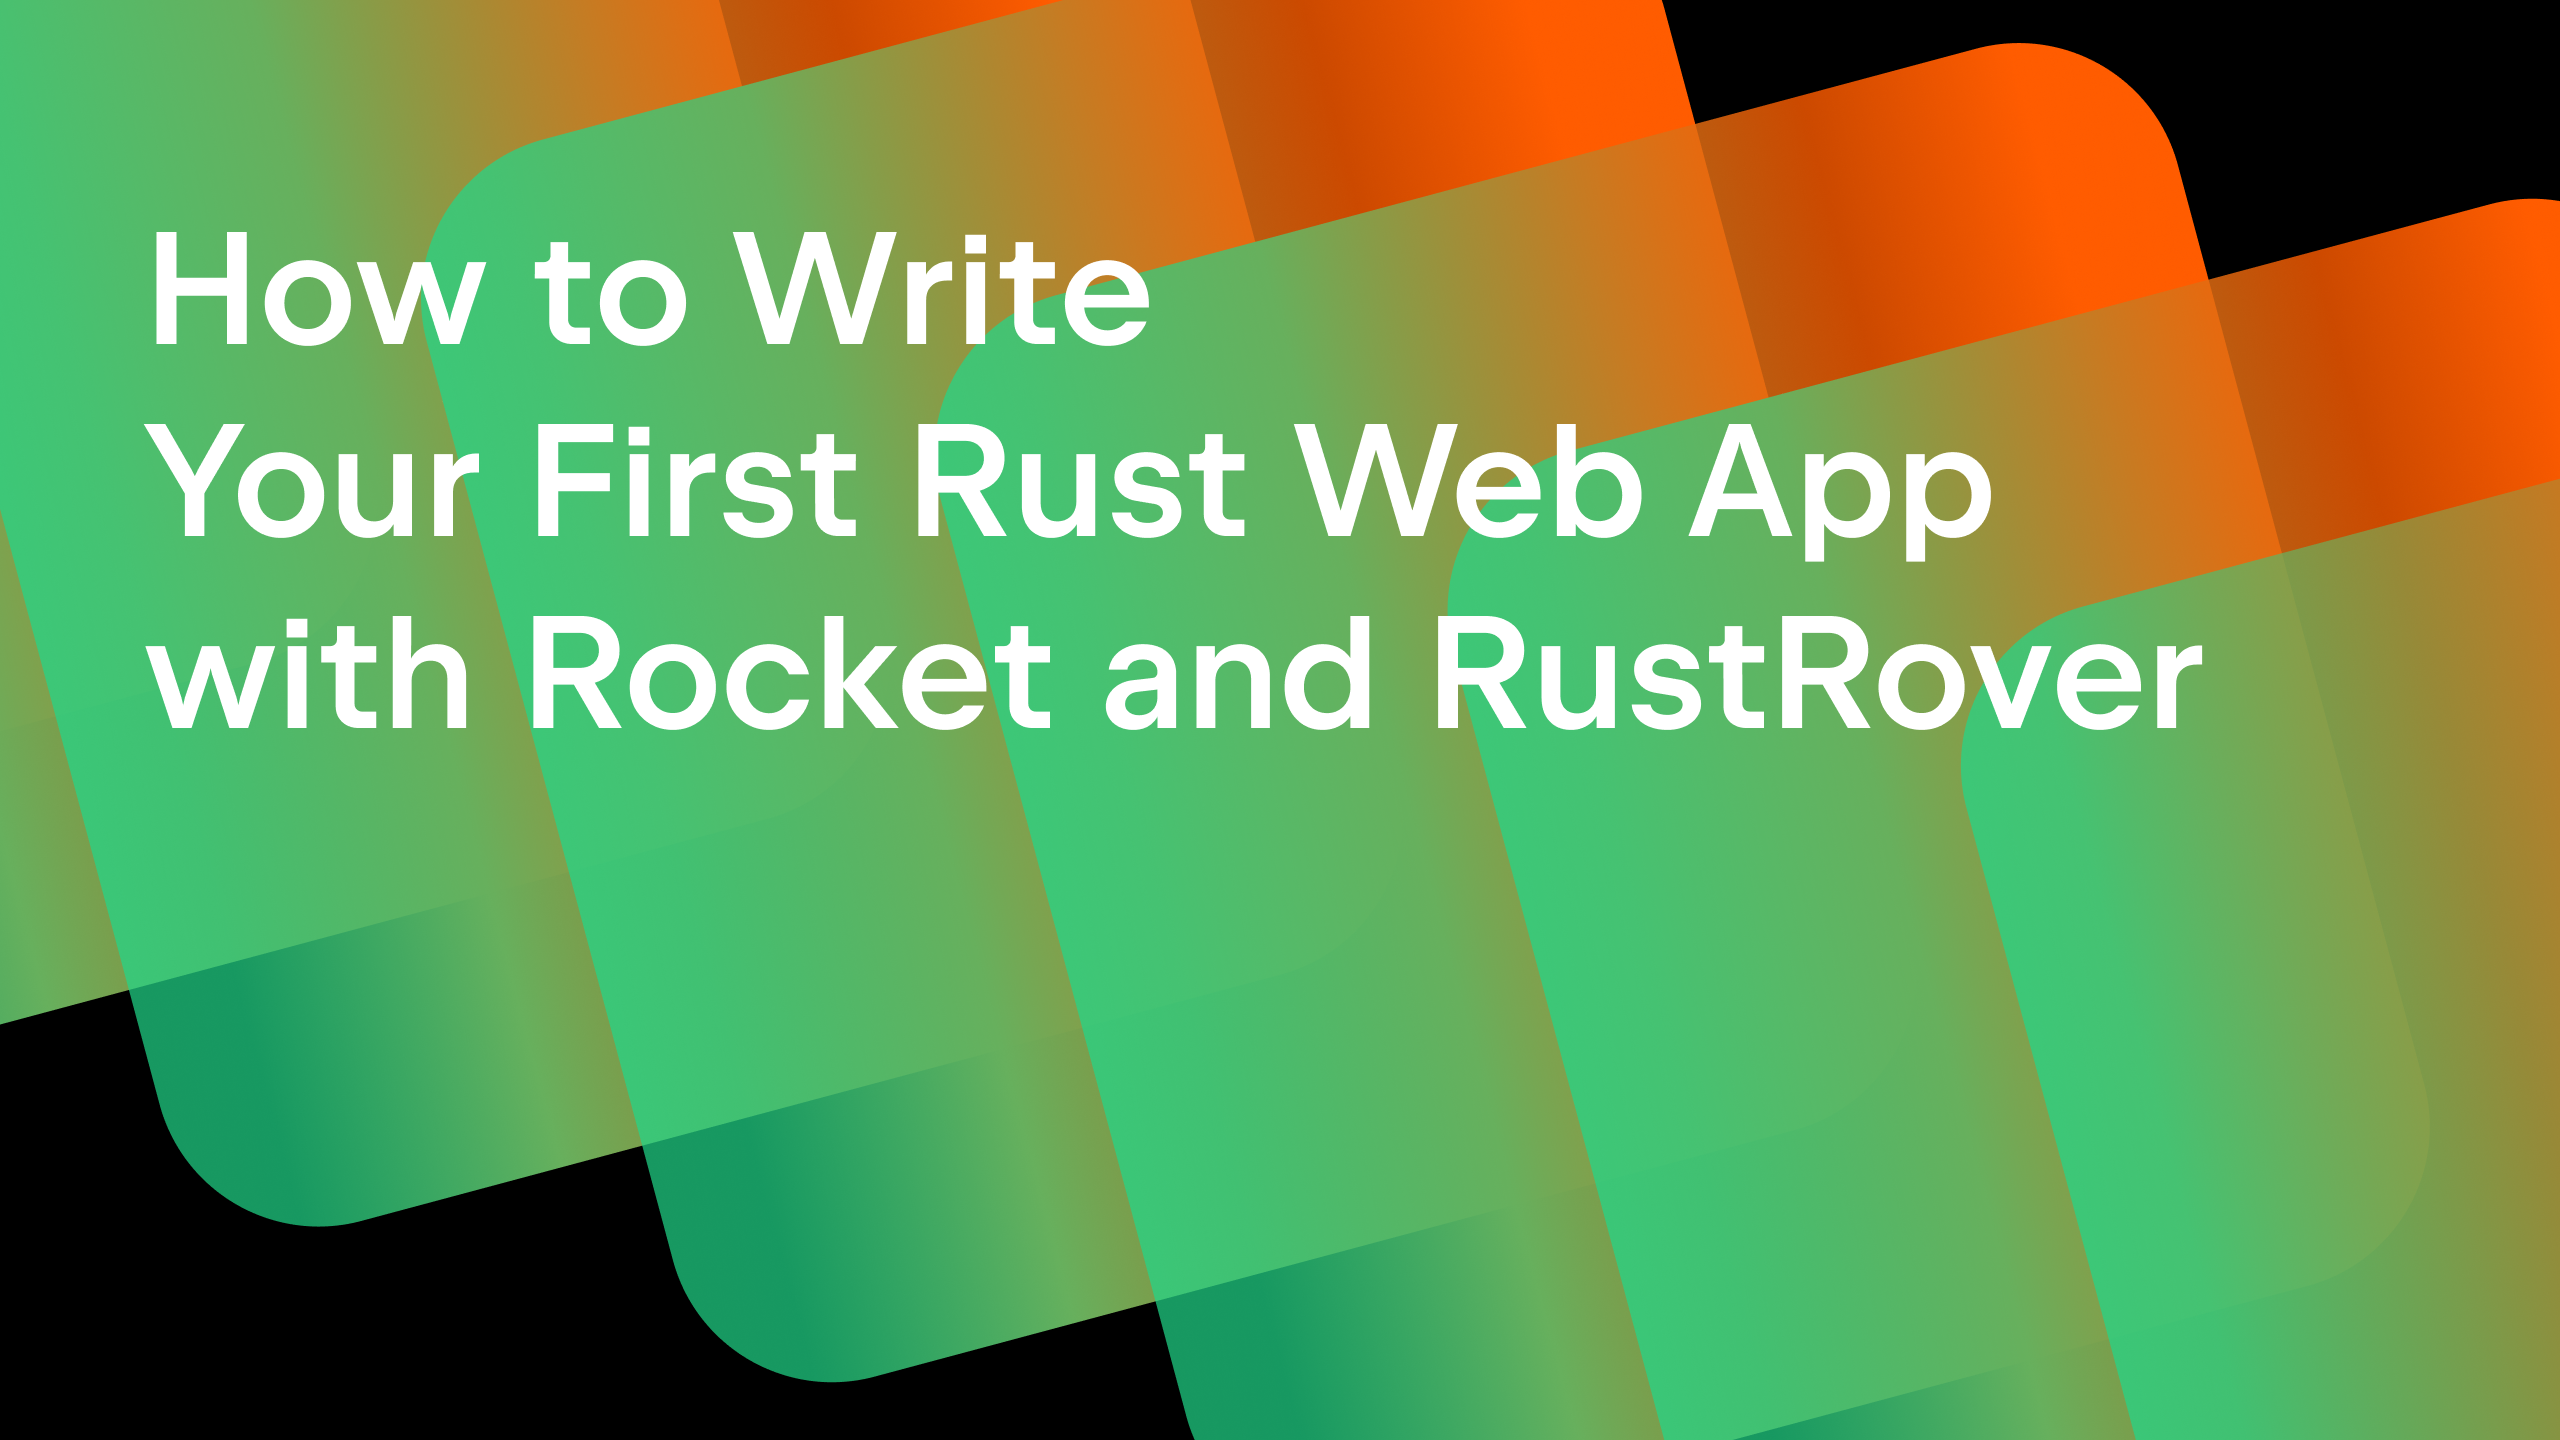 How to Write Your First Rust Web App with Rocket and RustRover